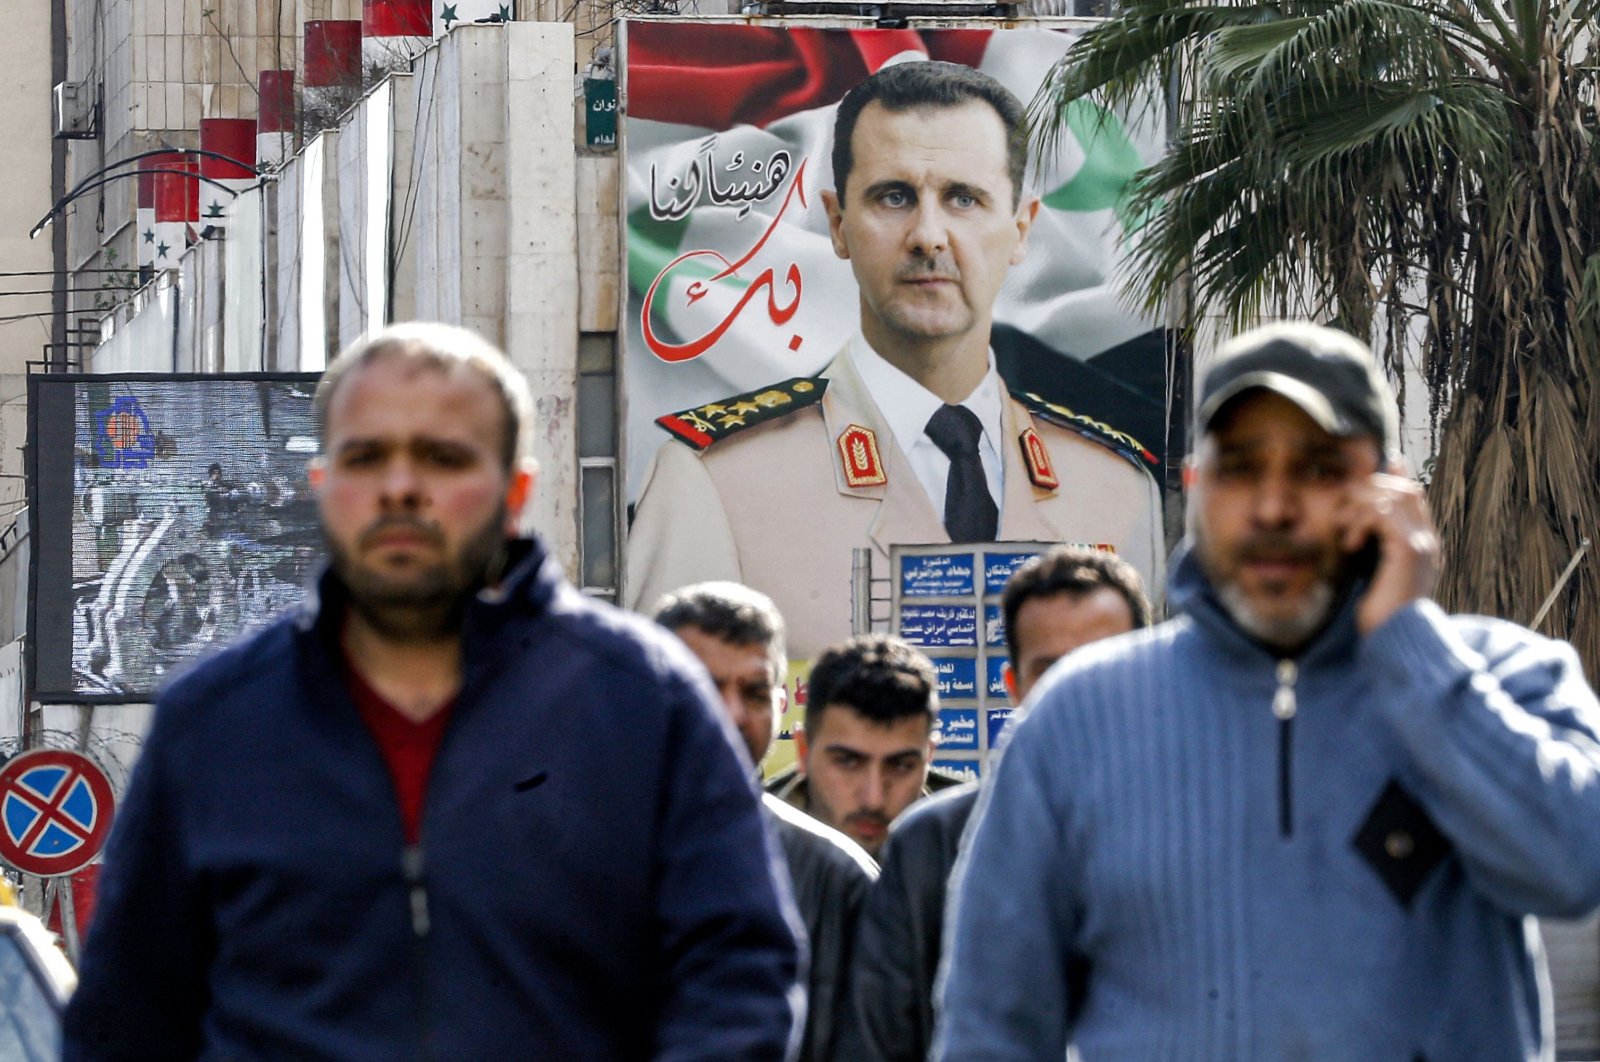 People walk past a giant billboard showing Syria&#039;s Bashar Assad dressed in military uniform along a street in the capital Damascus, Dec. 15, 2021. (AFP Photo)